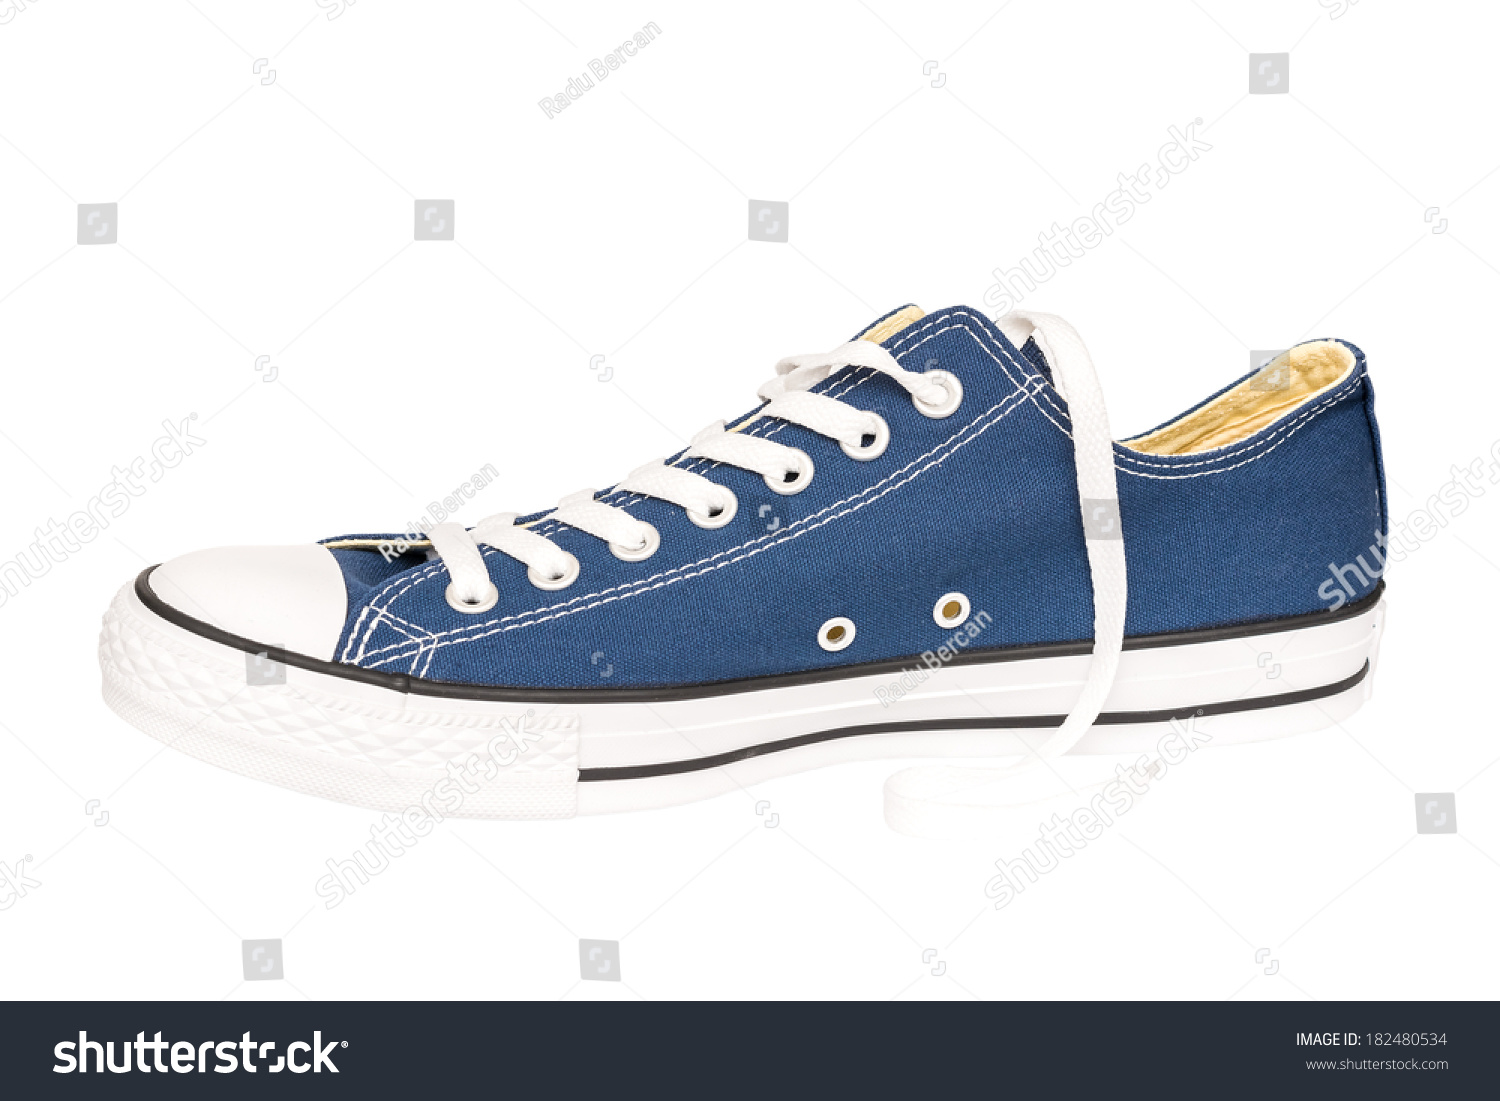 Bucharest, Romania - March 18, 2014: All Star Converse Sneakers ...